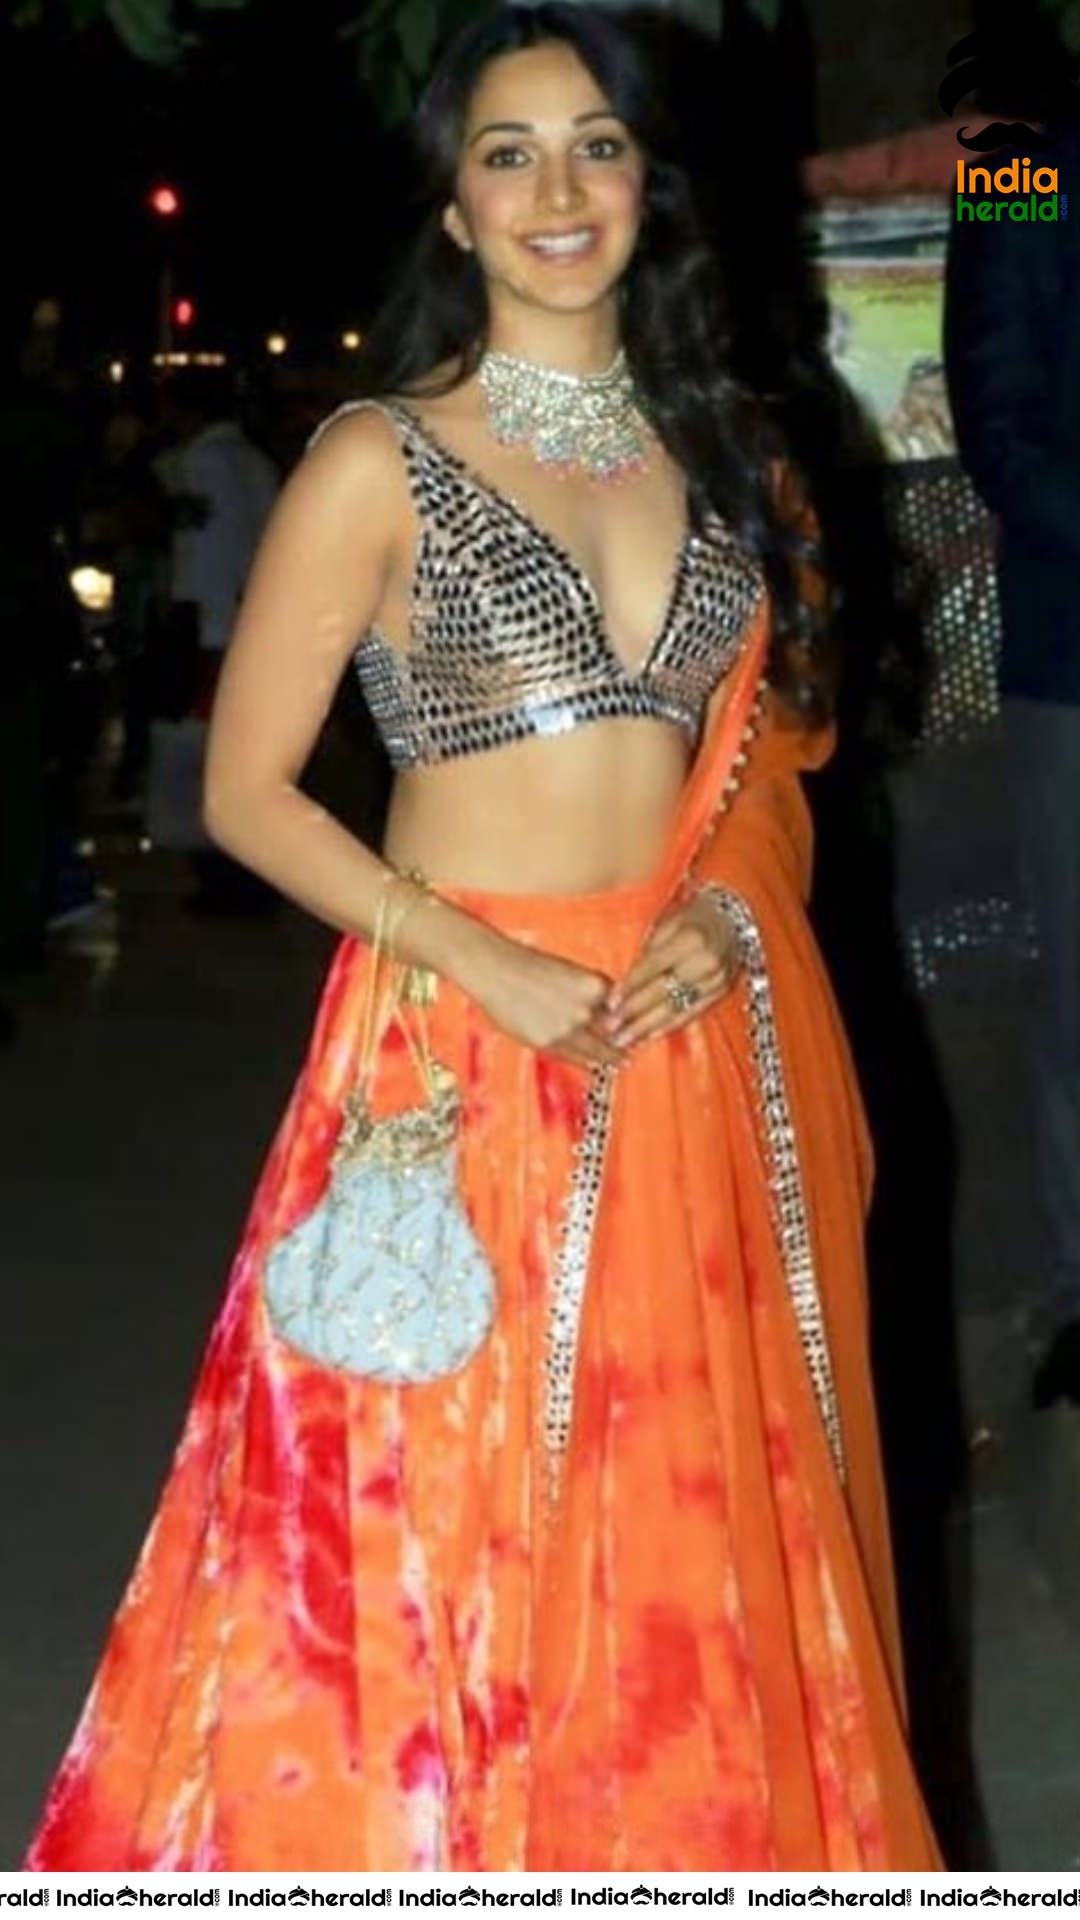 Kiara Advani Flaunts her Hot Waist and Cleavage at a Marriage Function